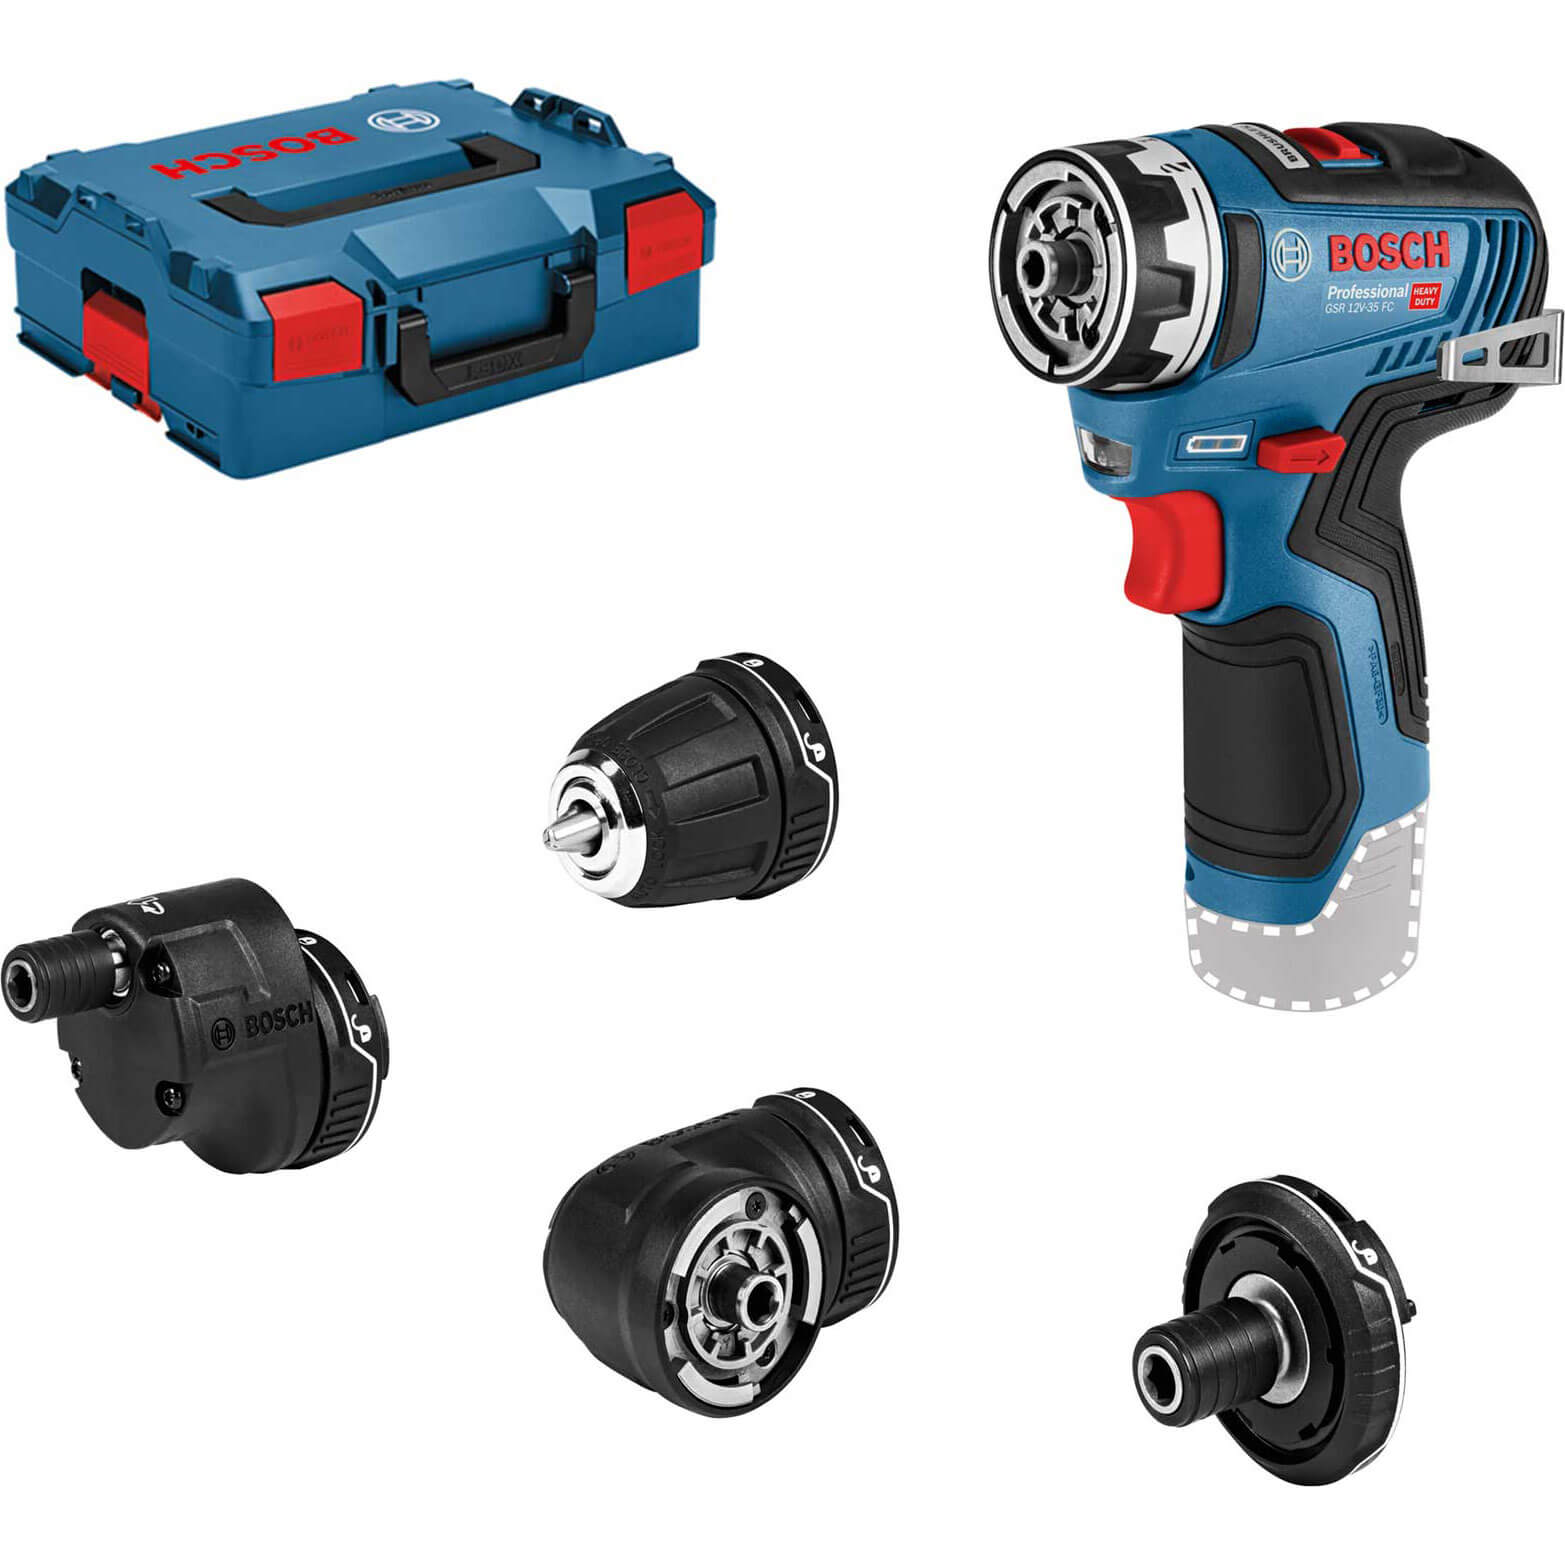 Image of Bosch GSR 12V-35 FC 12v Cordless Brushless Drill Driver No Batteries No Charger Case & Accessories